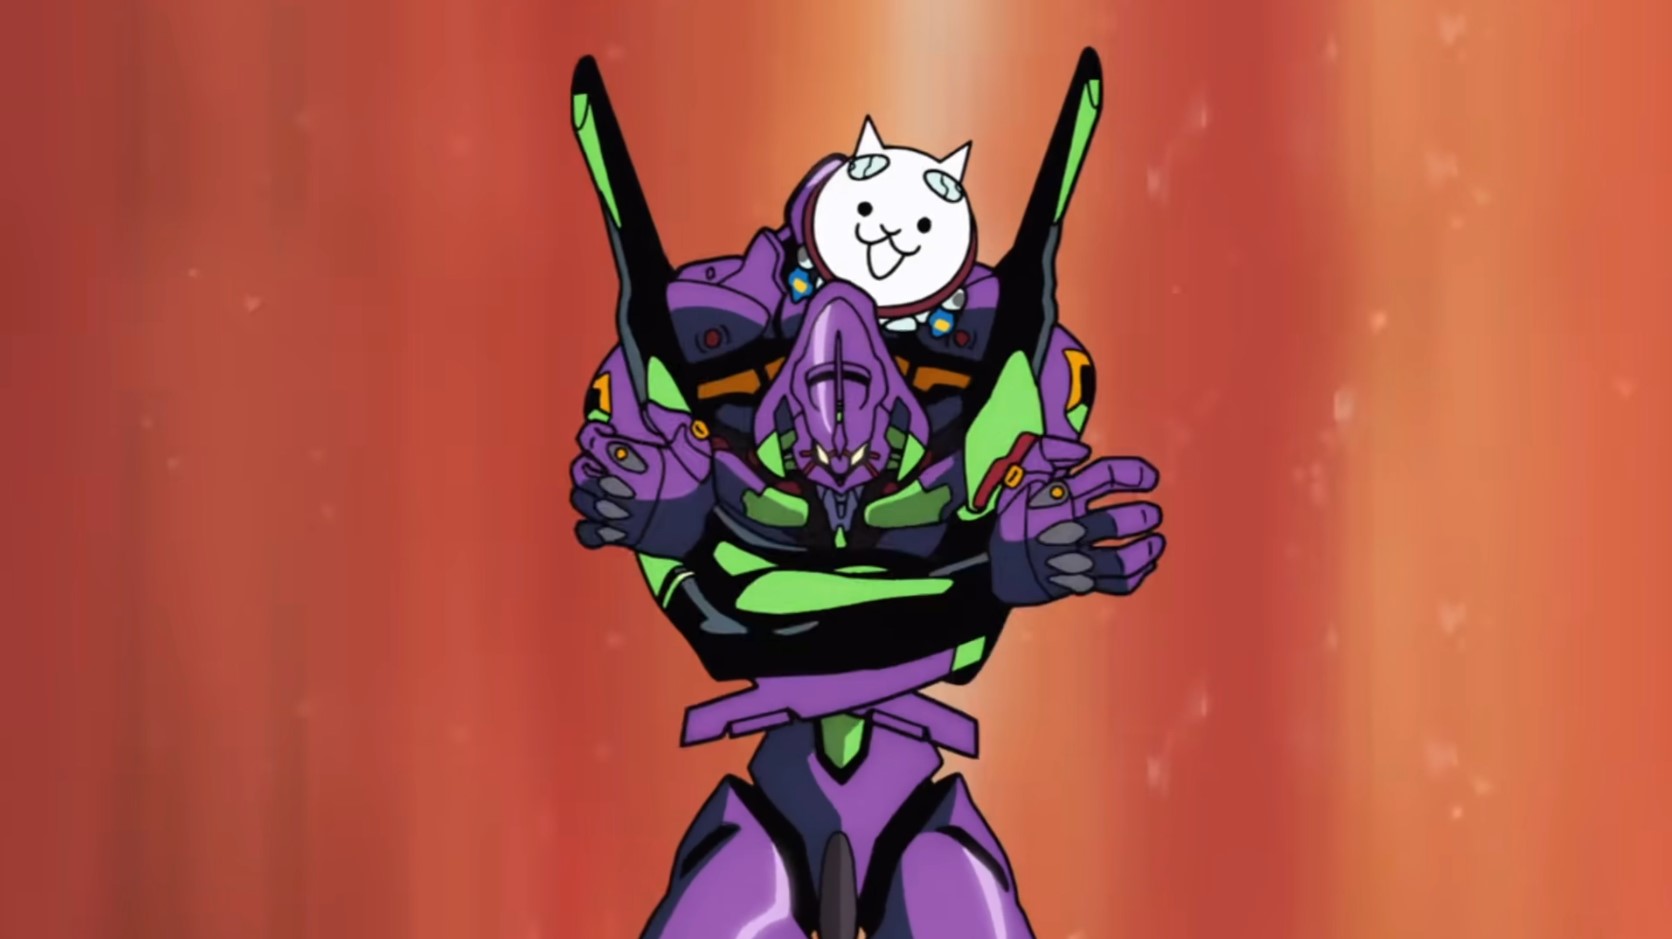 Why is there an official cat version of the Evangelion theme? Rice